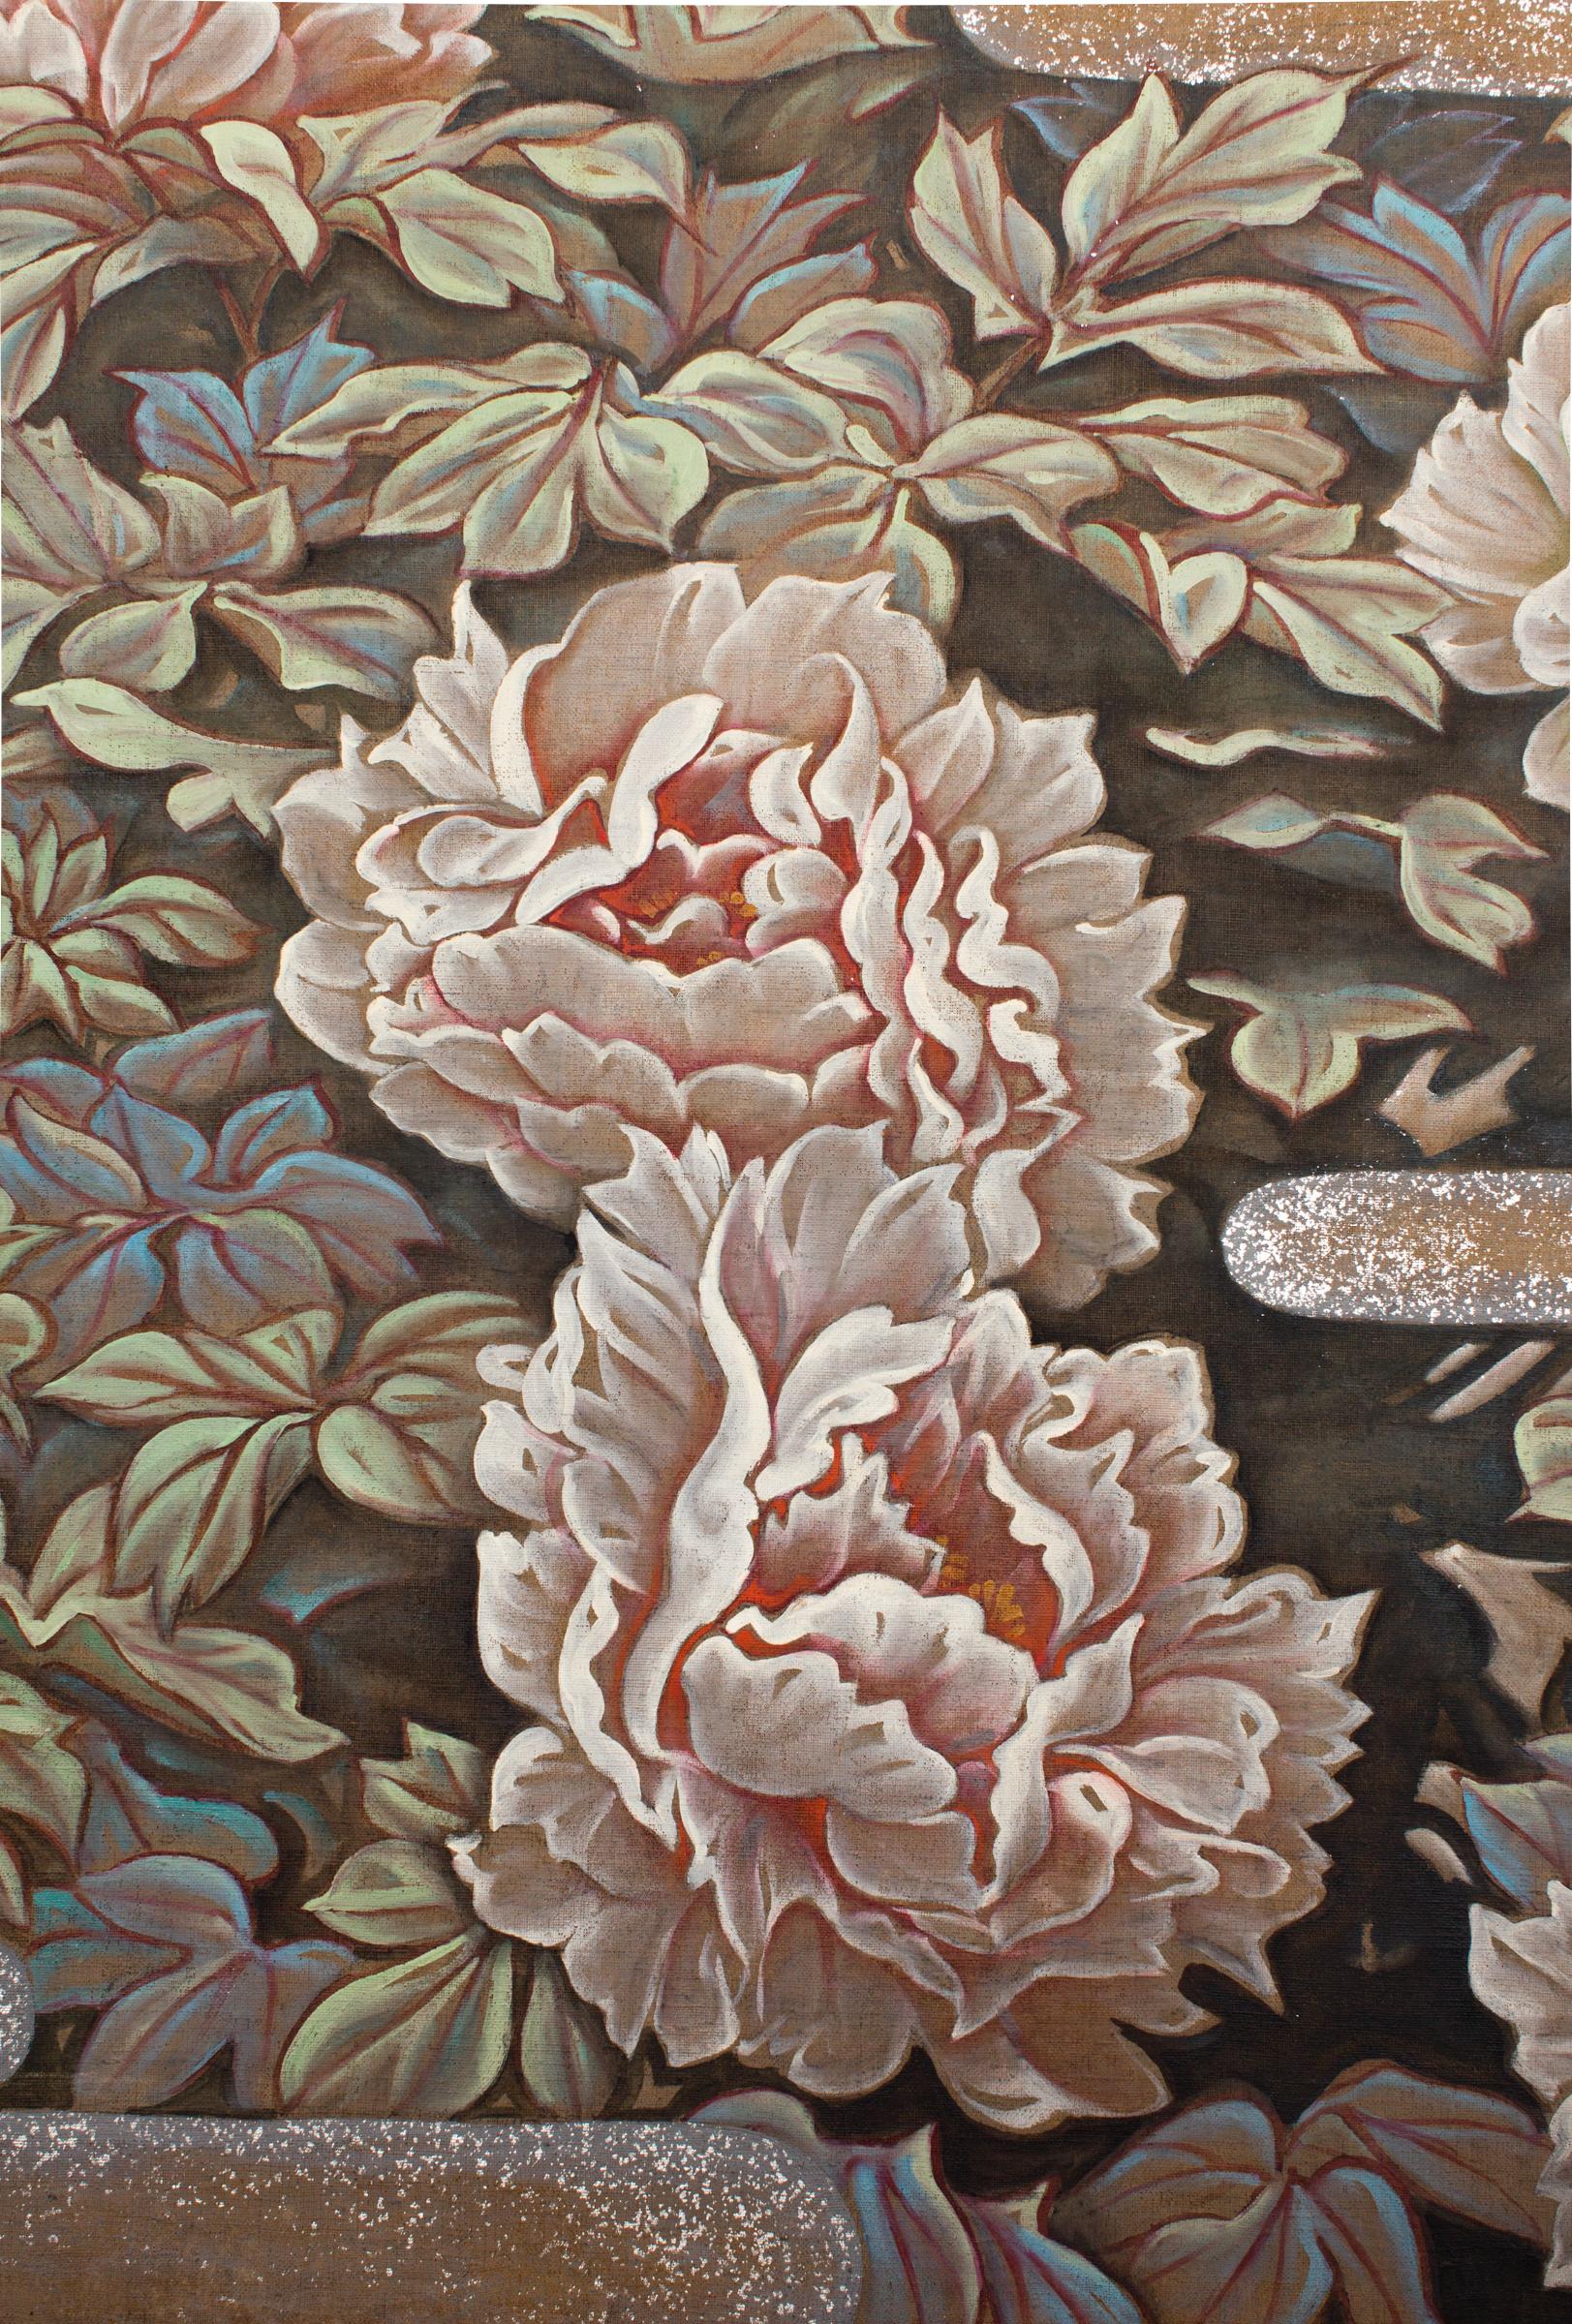 Japanese Two Panel Screen: Peonies In the Mist. Showa period (1926 - 1945) painting in oil on canvas of peonies with gold and silver dust clouds. Signature reads, Seishu.